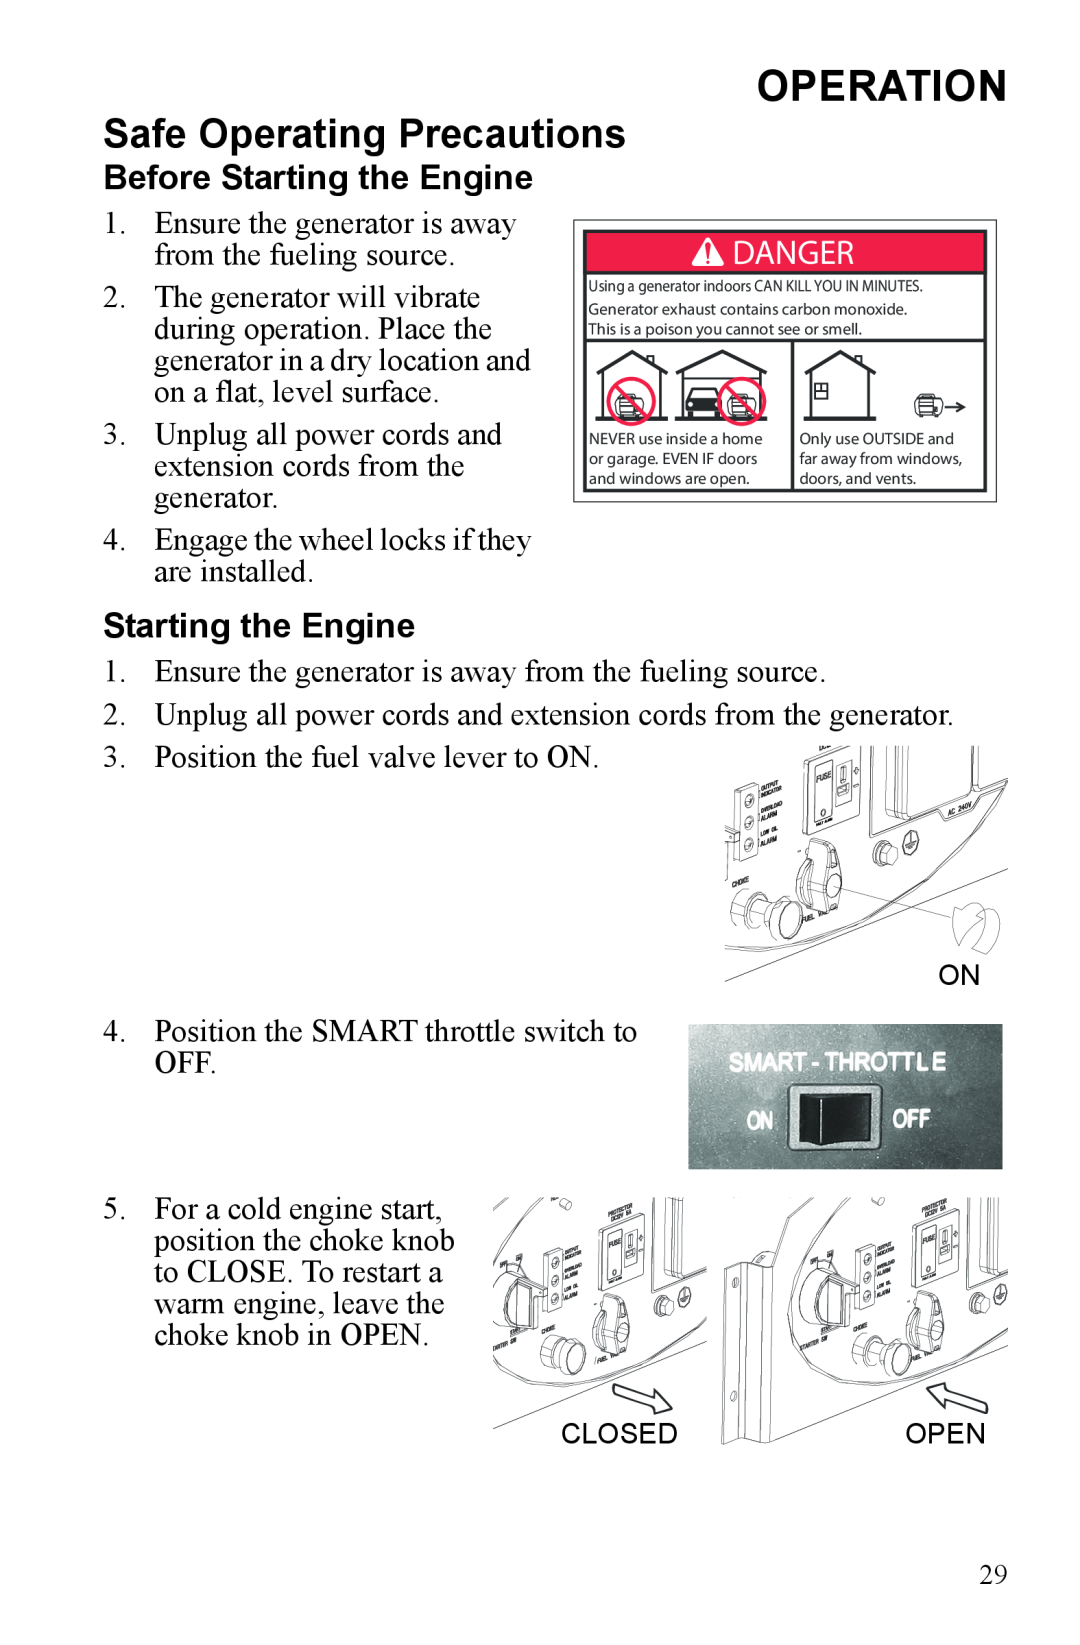 Polaris P3000iE manual Operation, Before Starting the Engine, Danger 